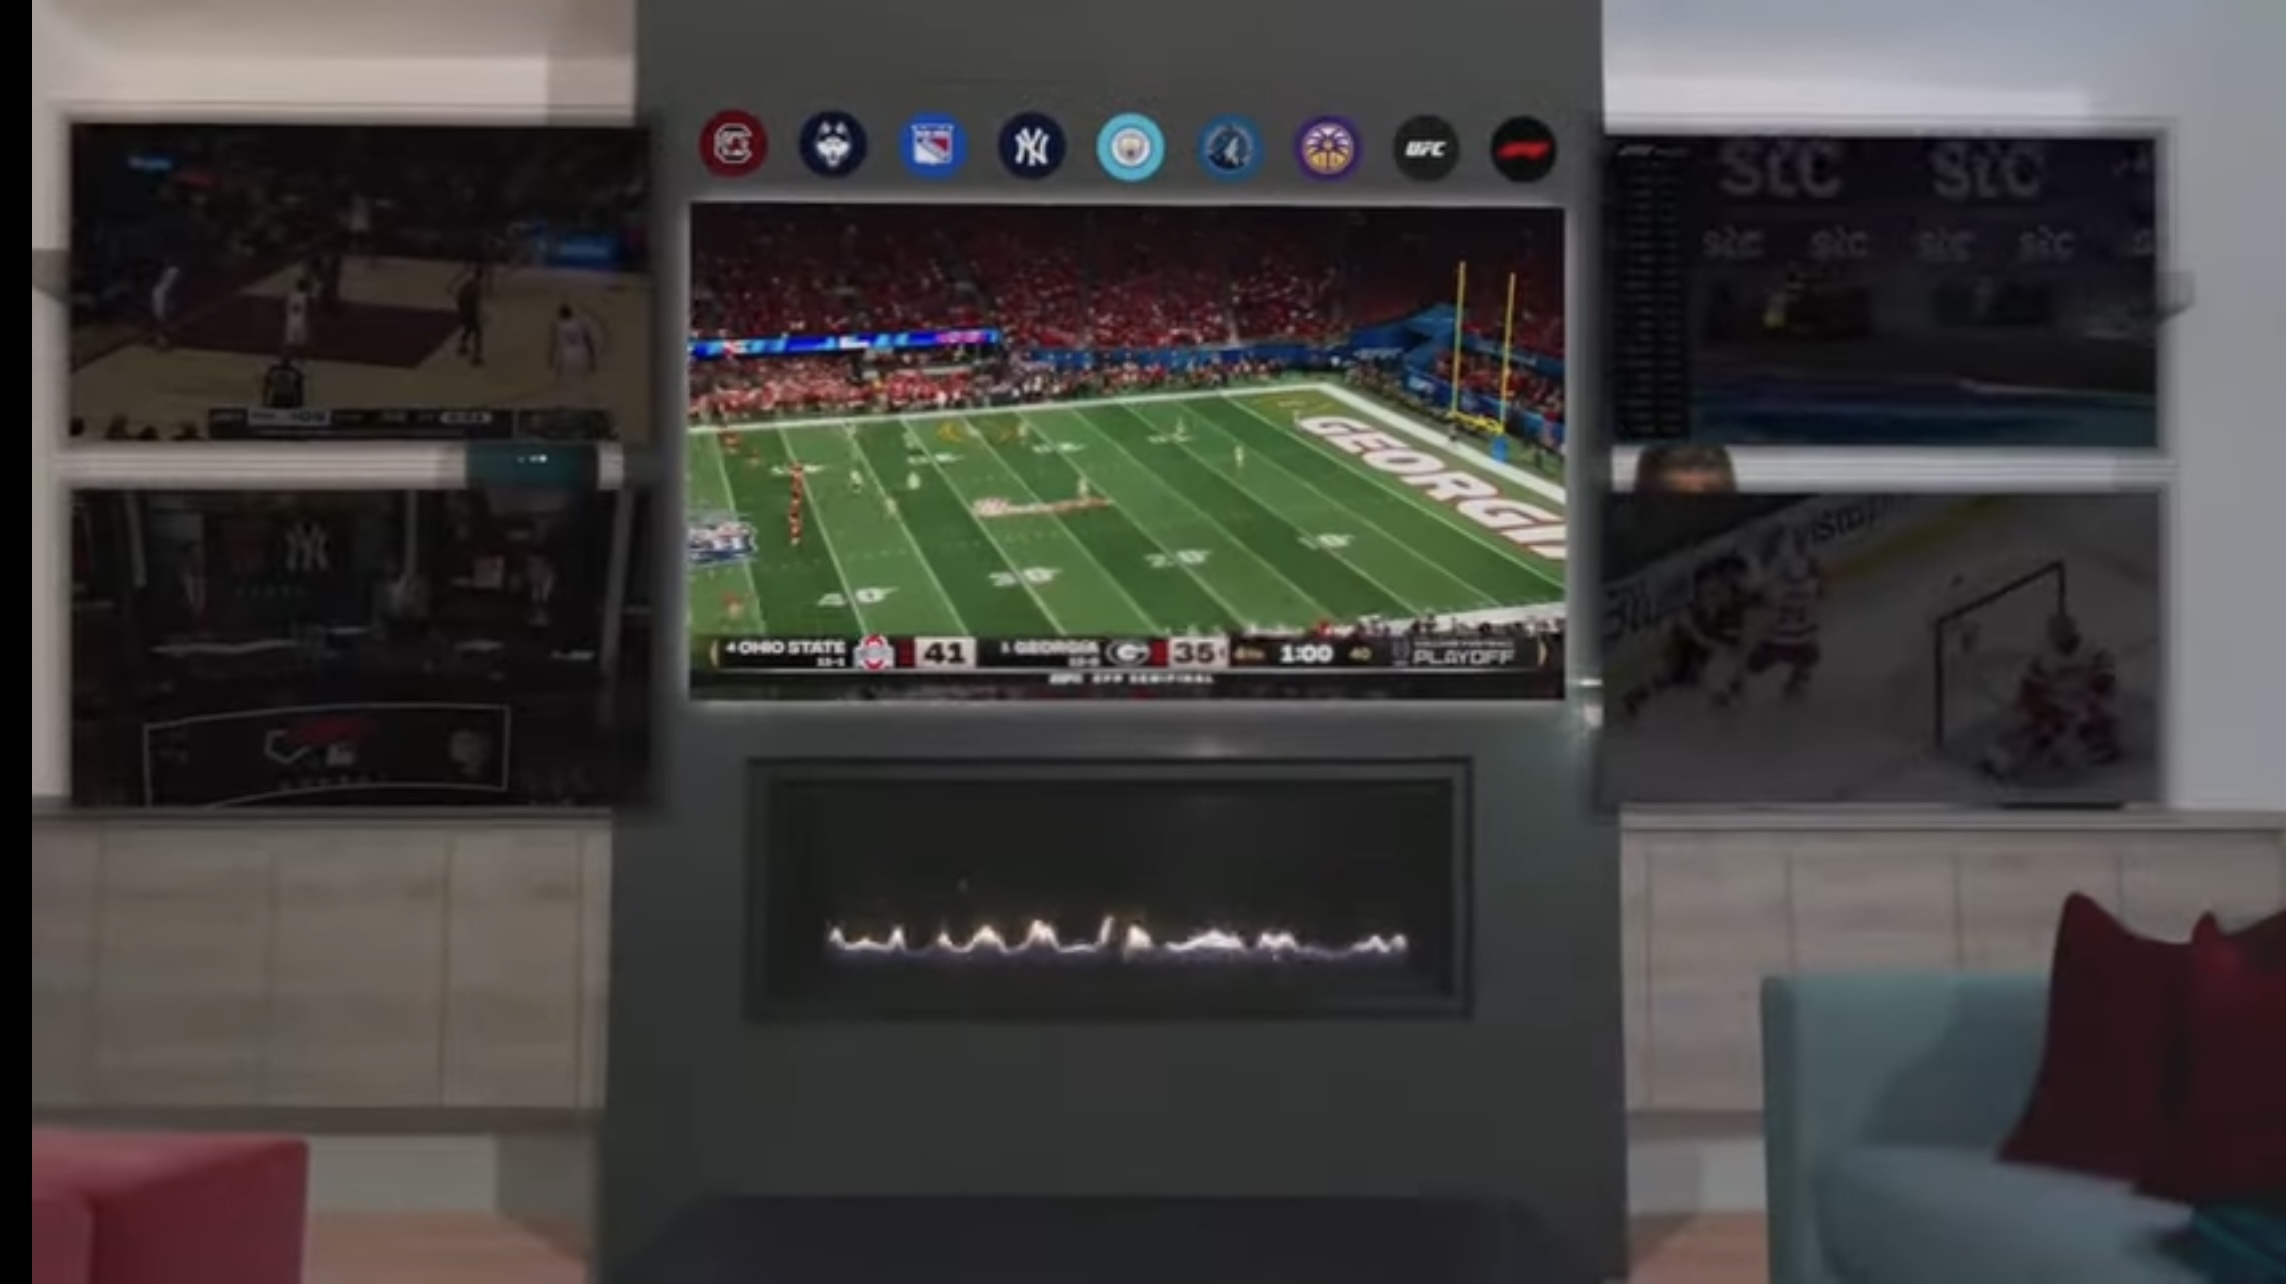 Watching the CFB championship via the Apple Vision Pro